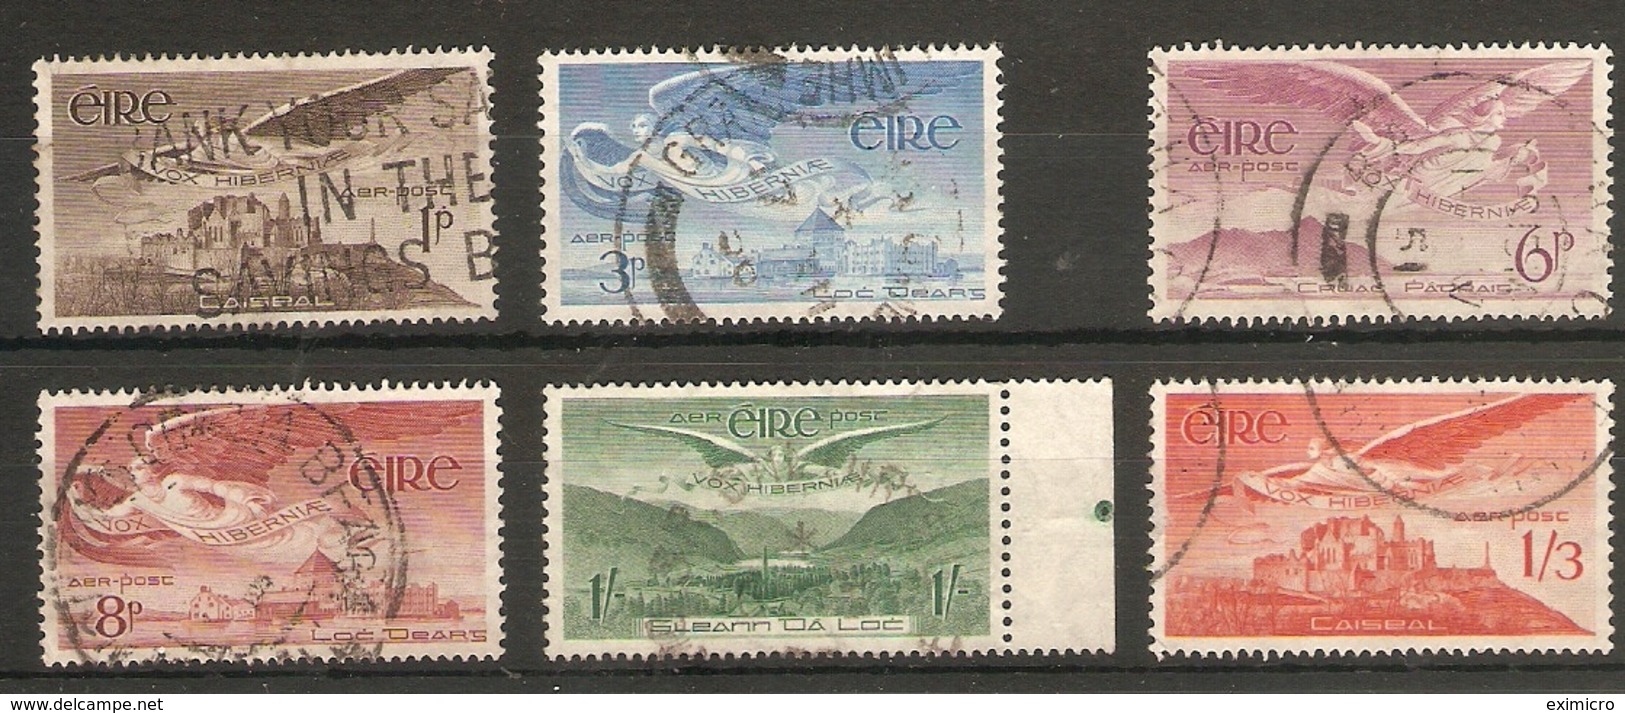 IRELAND 1948 - 1954 SET OF 6 STAMPS SG 140/143a FINE USED - Used Stamps